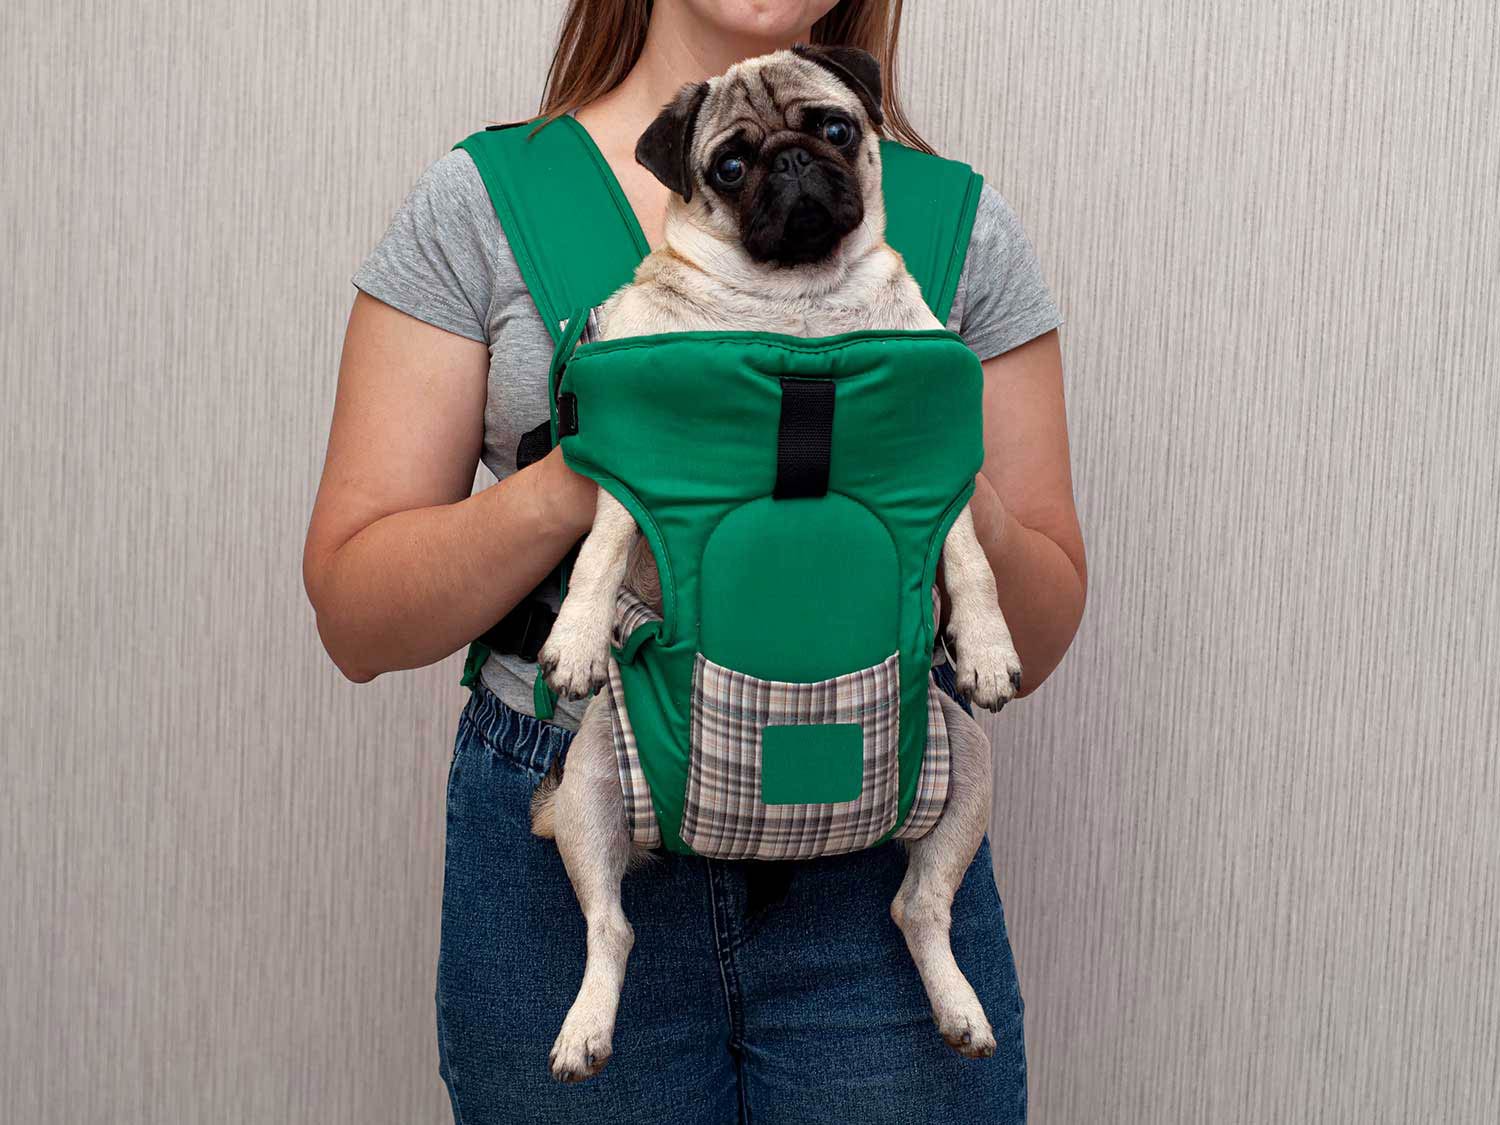 Adorable pug in a carrier sling